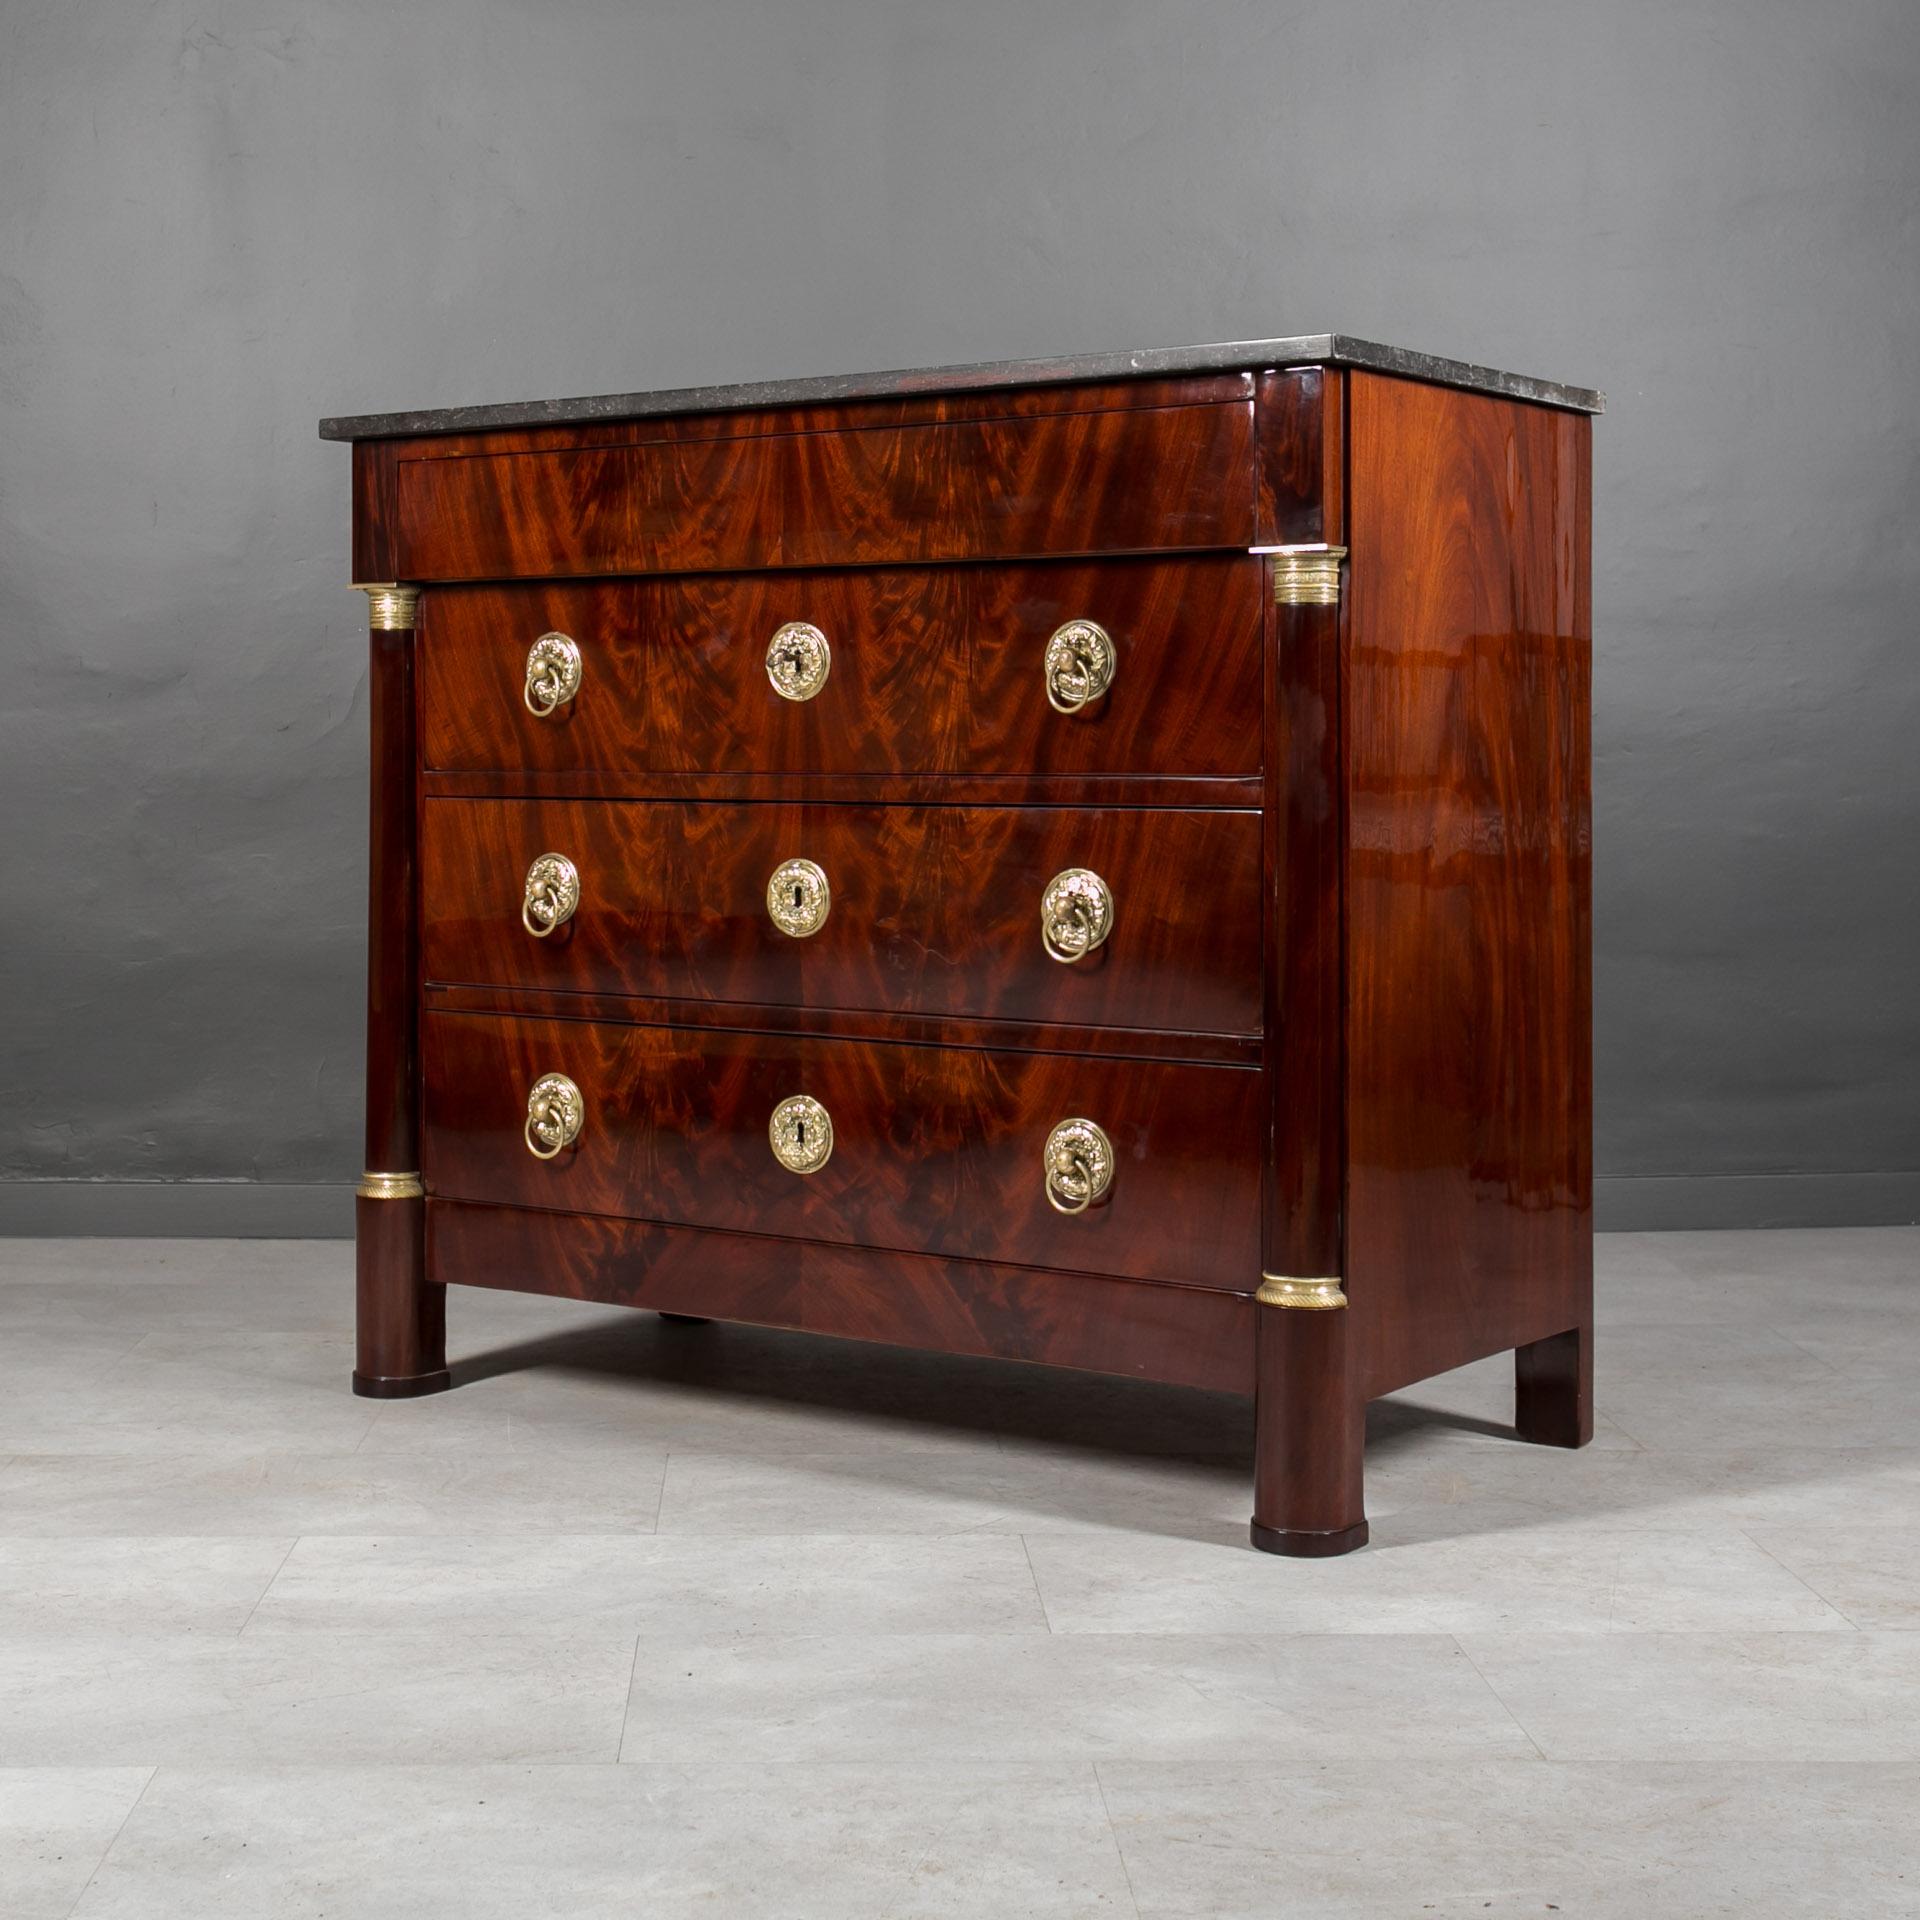 This Biedermeier chest of drawers was made in 19th Century, originating from France. Crafted with precision and attention to details, construction made of oak and softwood adorned with stunning mahogany pyramid veneer.
Admire its distinguished